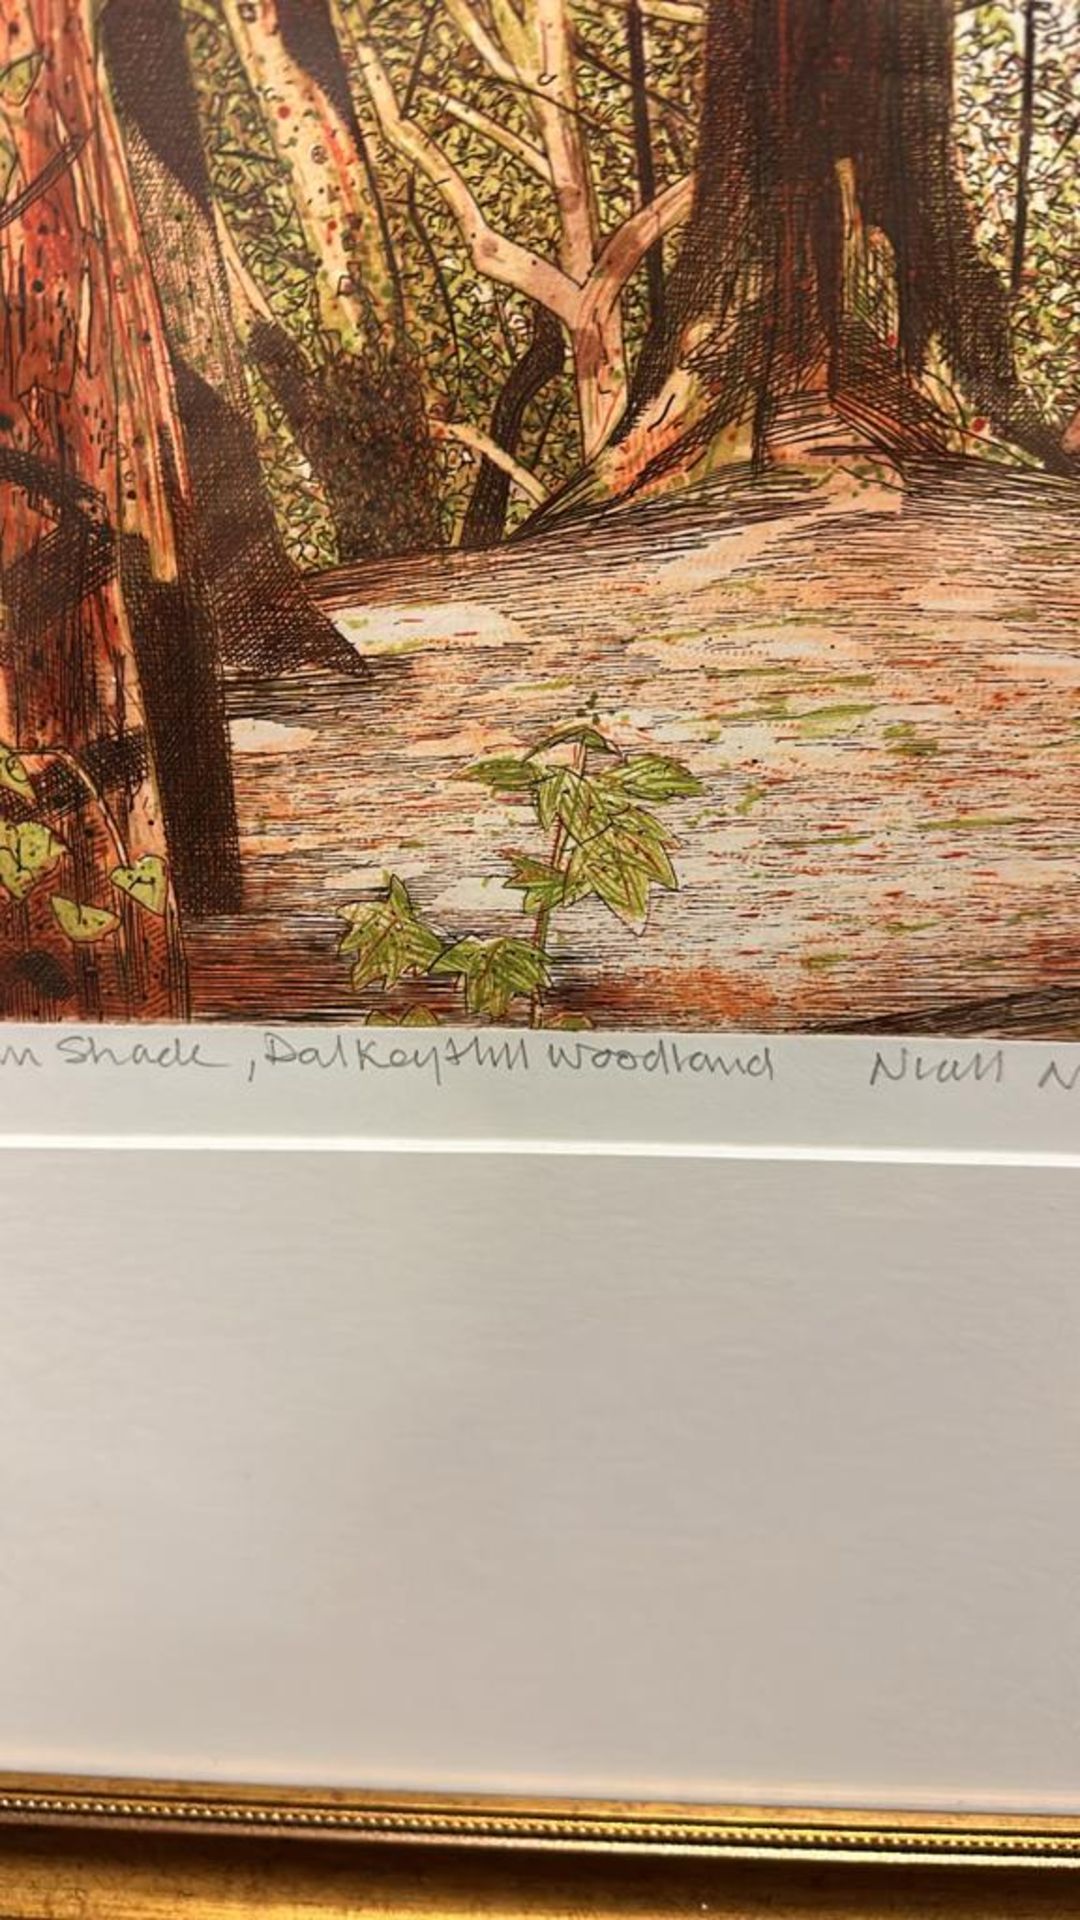 Work On Paper Niall Naessens (Irish) Limited Edition Etching Titled Sapling, Dolkey Hill Woodland 13 - Image 4 of 4